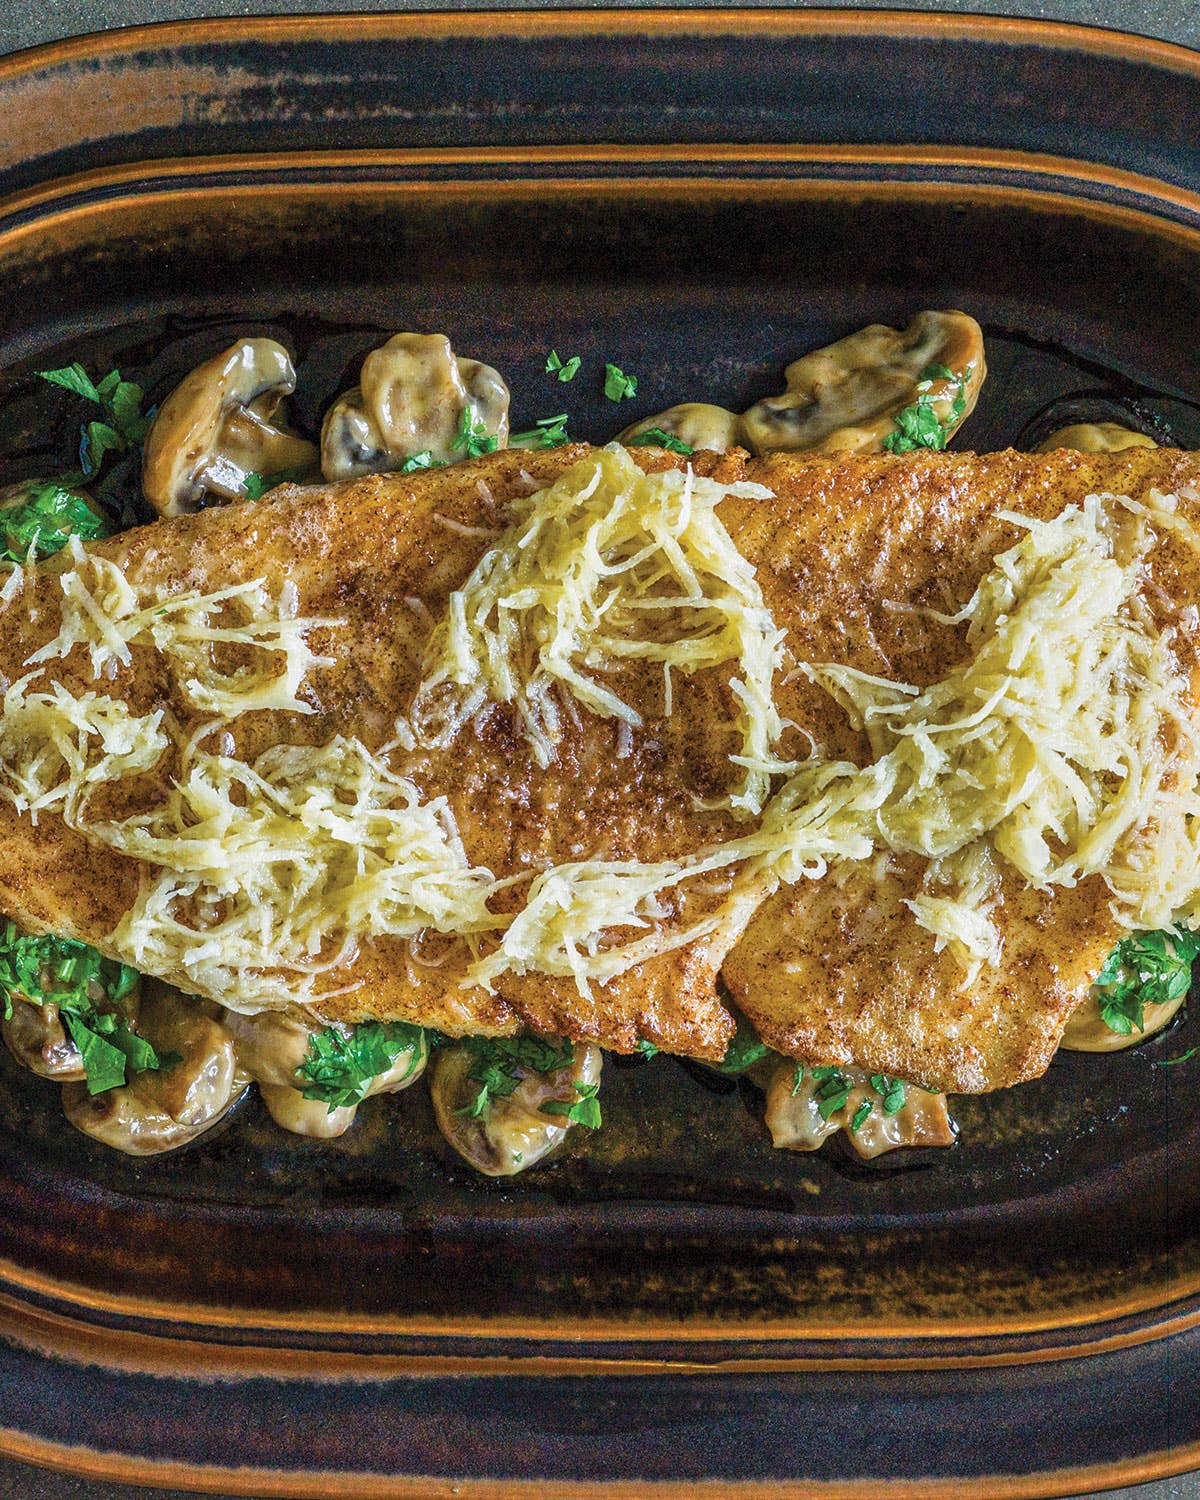 Pike-perch with Creamed Mushrooms and Horseradish Butter